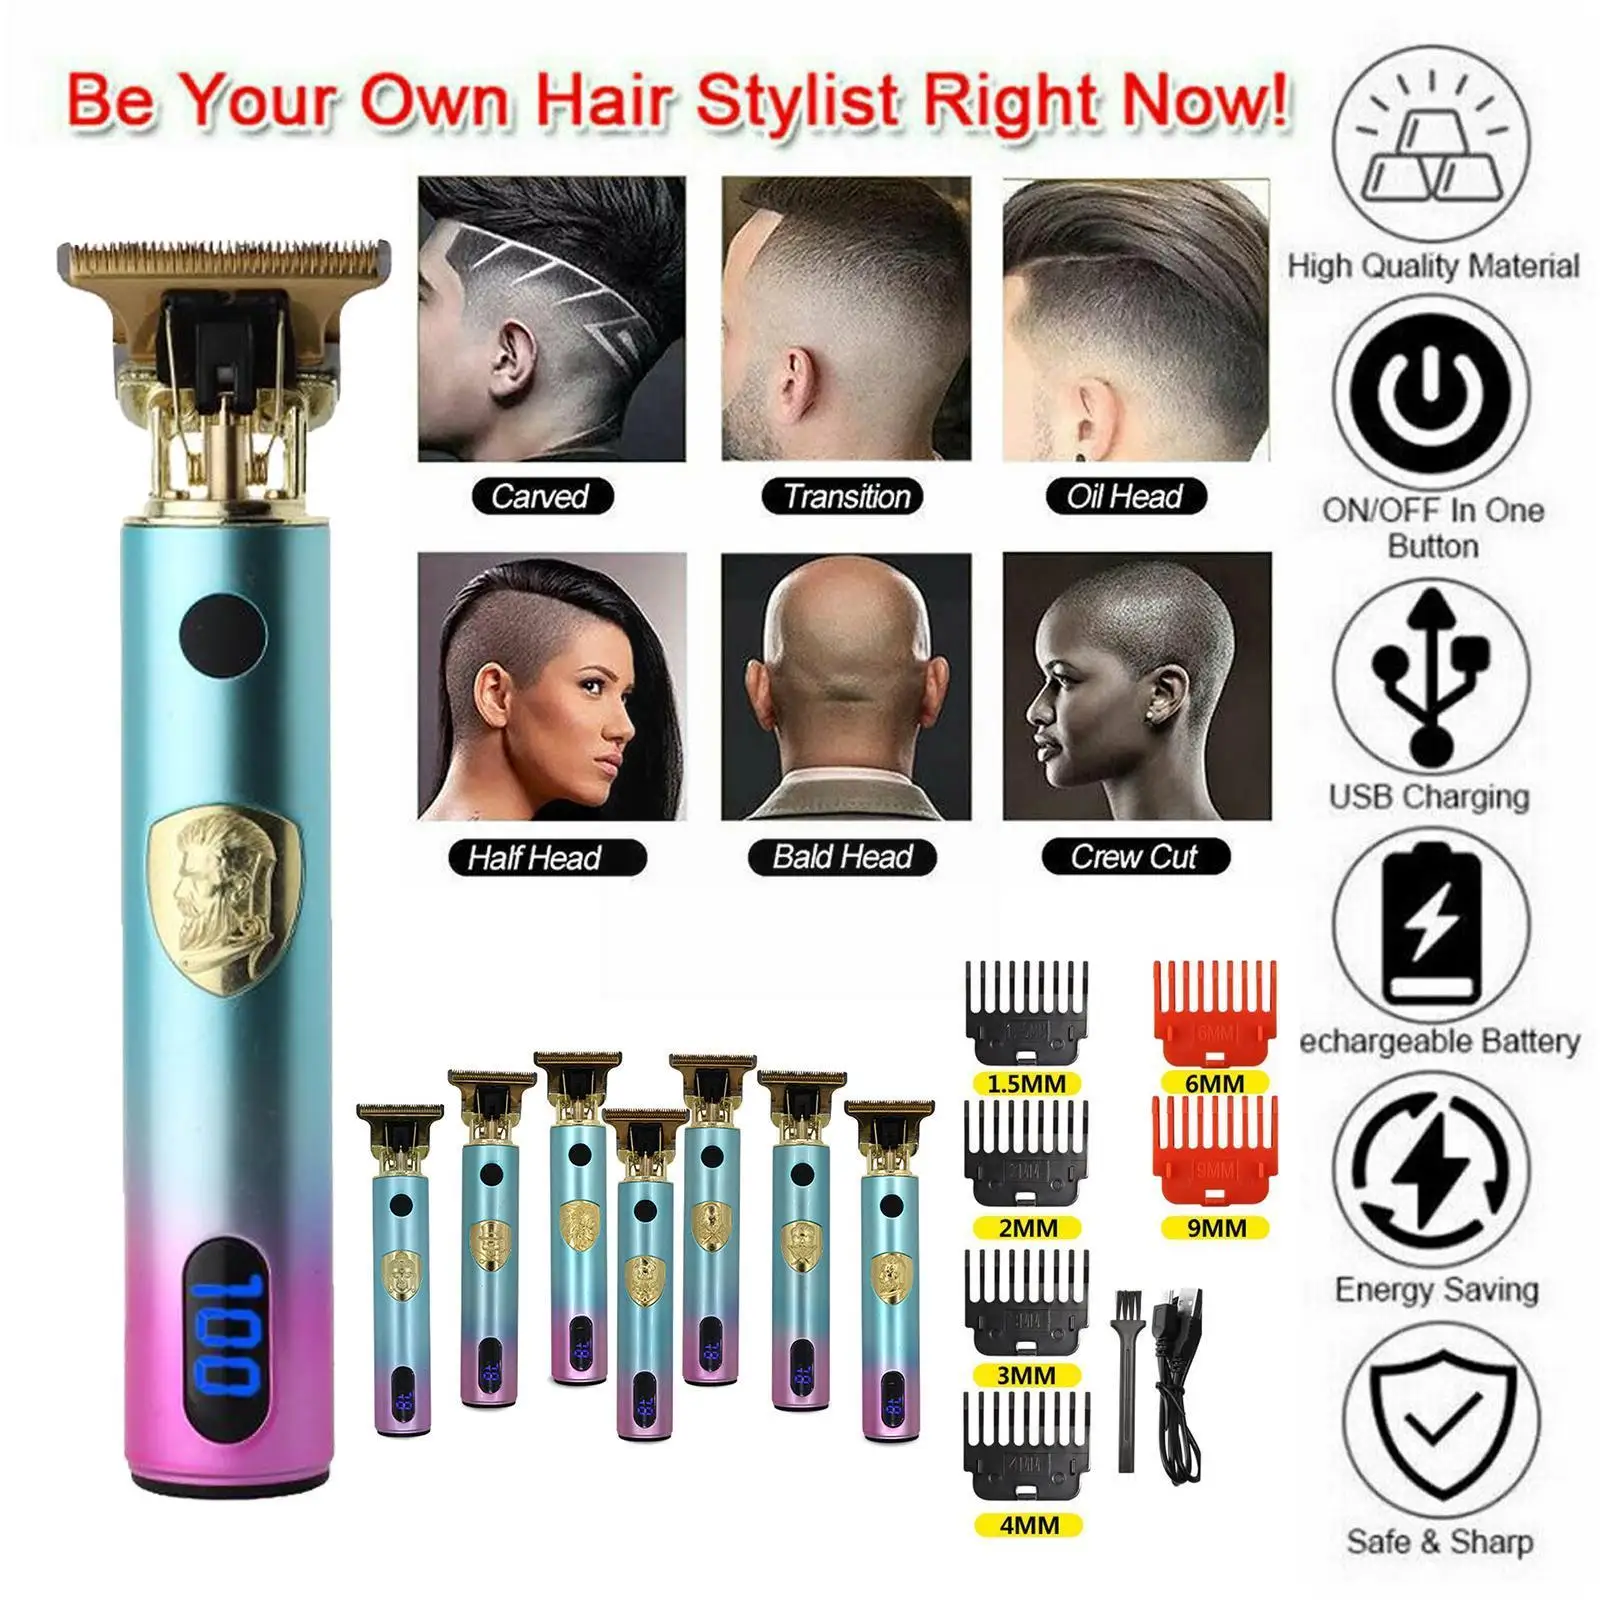 

T9 Electric Hair Men Beard Barber Trimmer Epilator Hair Cordless Shaver Hair Machine Cutting Professional Care Removal A2R5